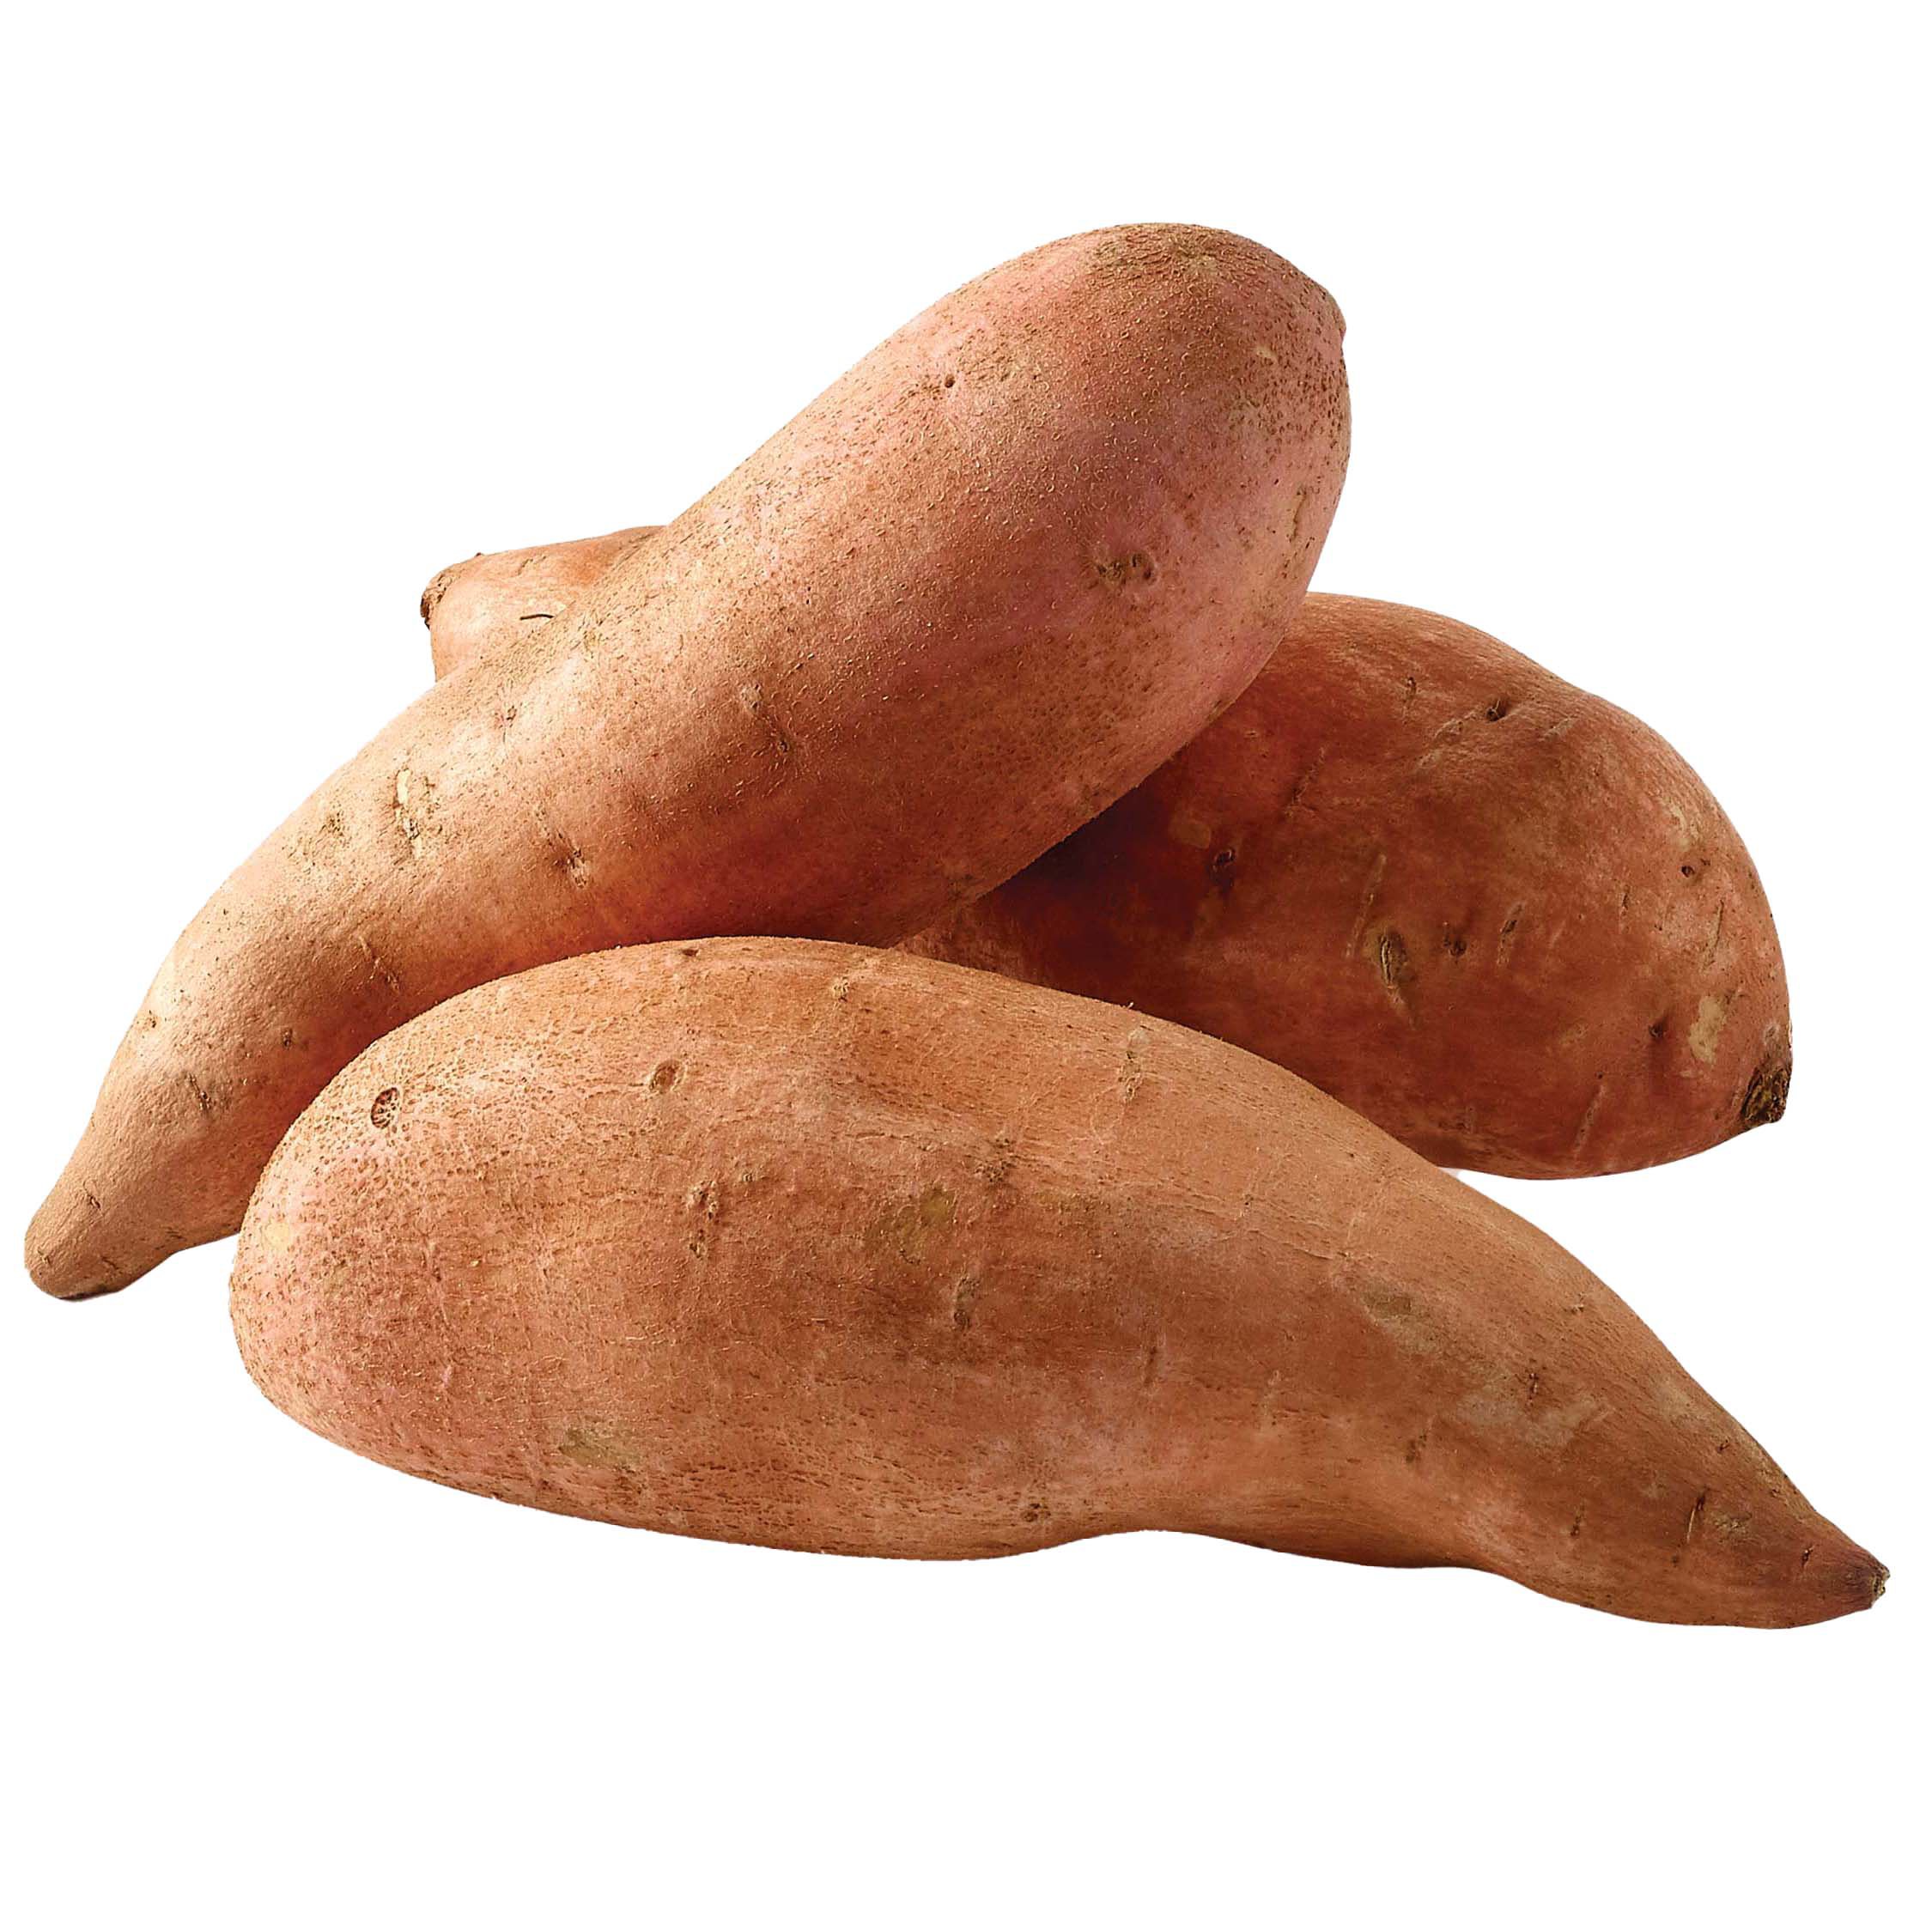 Skip The Oven If You Want The Best Tasting Sweet Potatoes